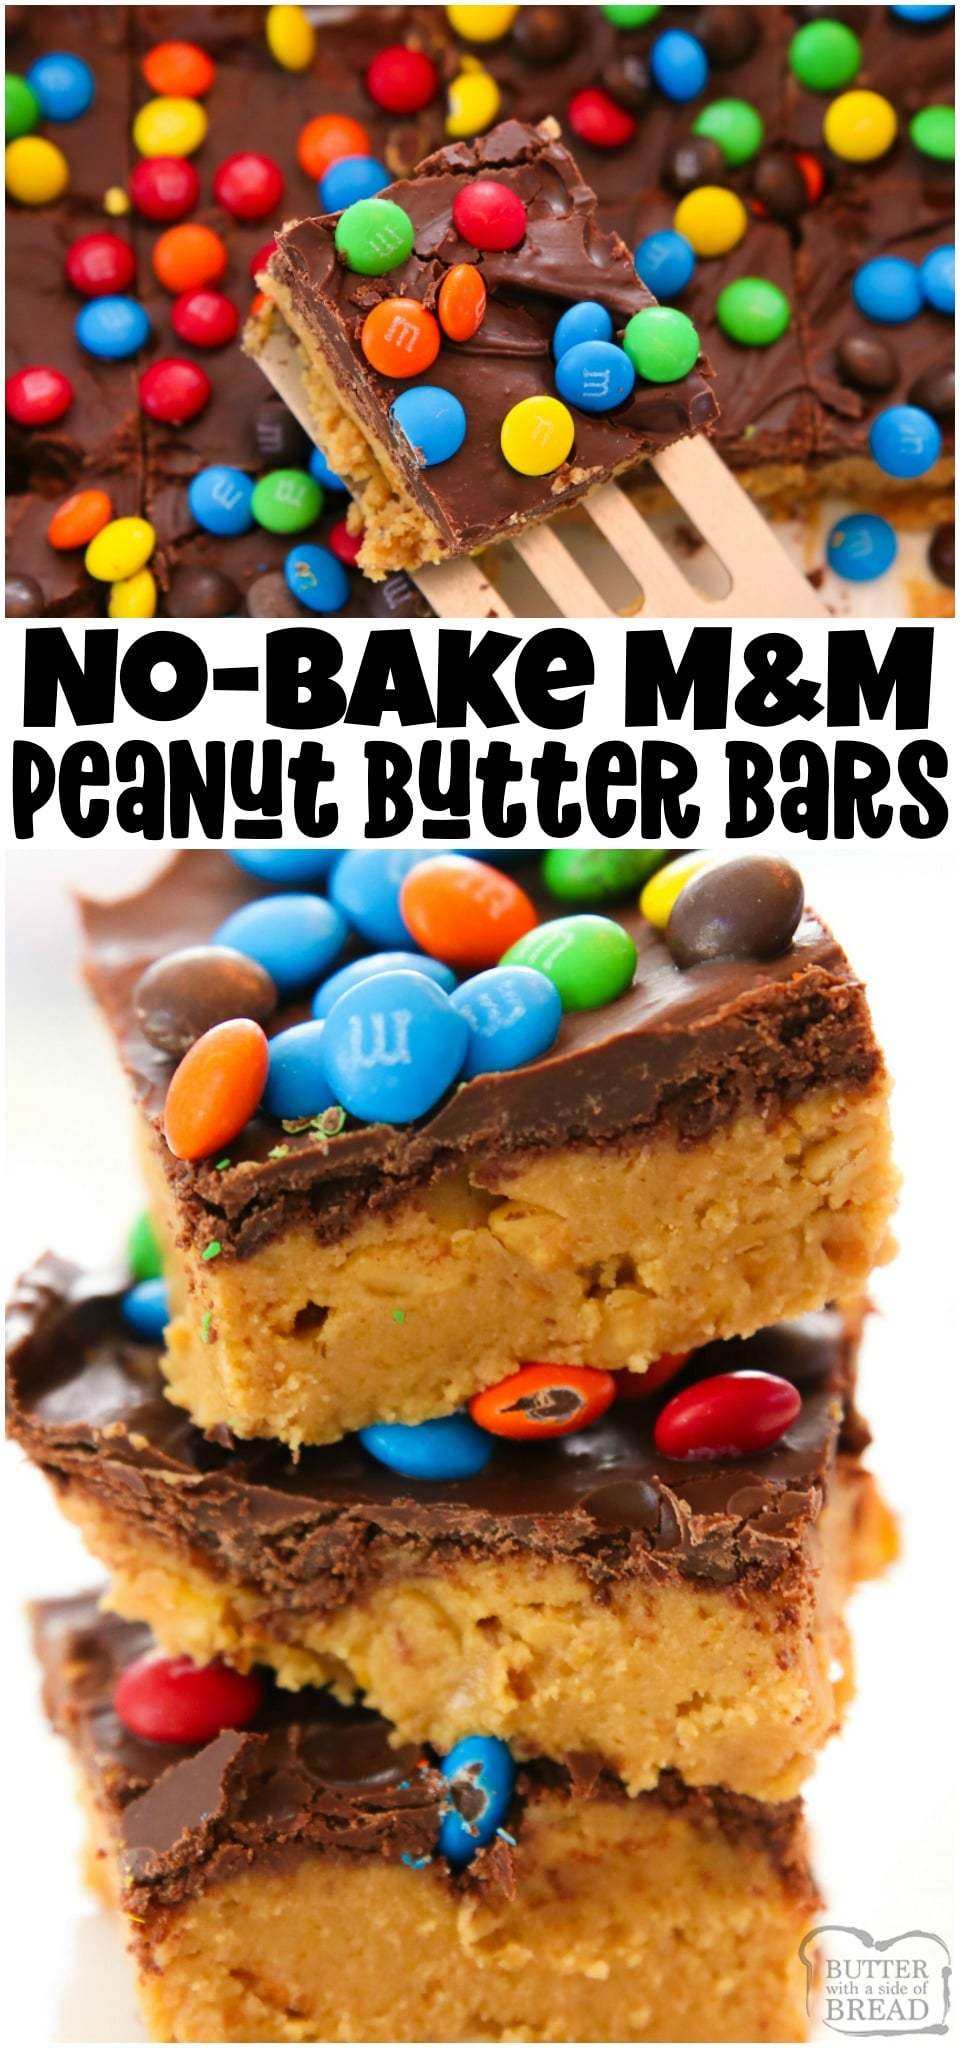 No Bake M&M Peanut Butter Bars are the perfect no-bake dessert to make this summer! Graham cracker crumbs, peanut butter and both chocolate chips and M&M's combine in this sweet and salty treat. #nobake #peanutbutter #chocolate #dessert #recipe from BUTTER WITH A SIDE OF BREAD